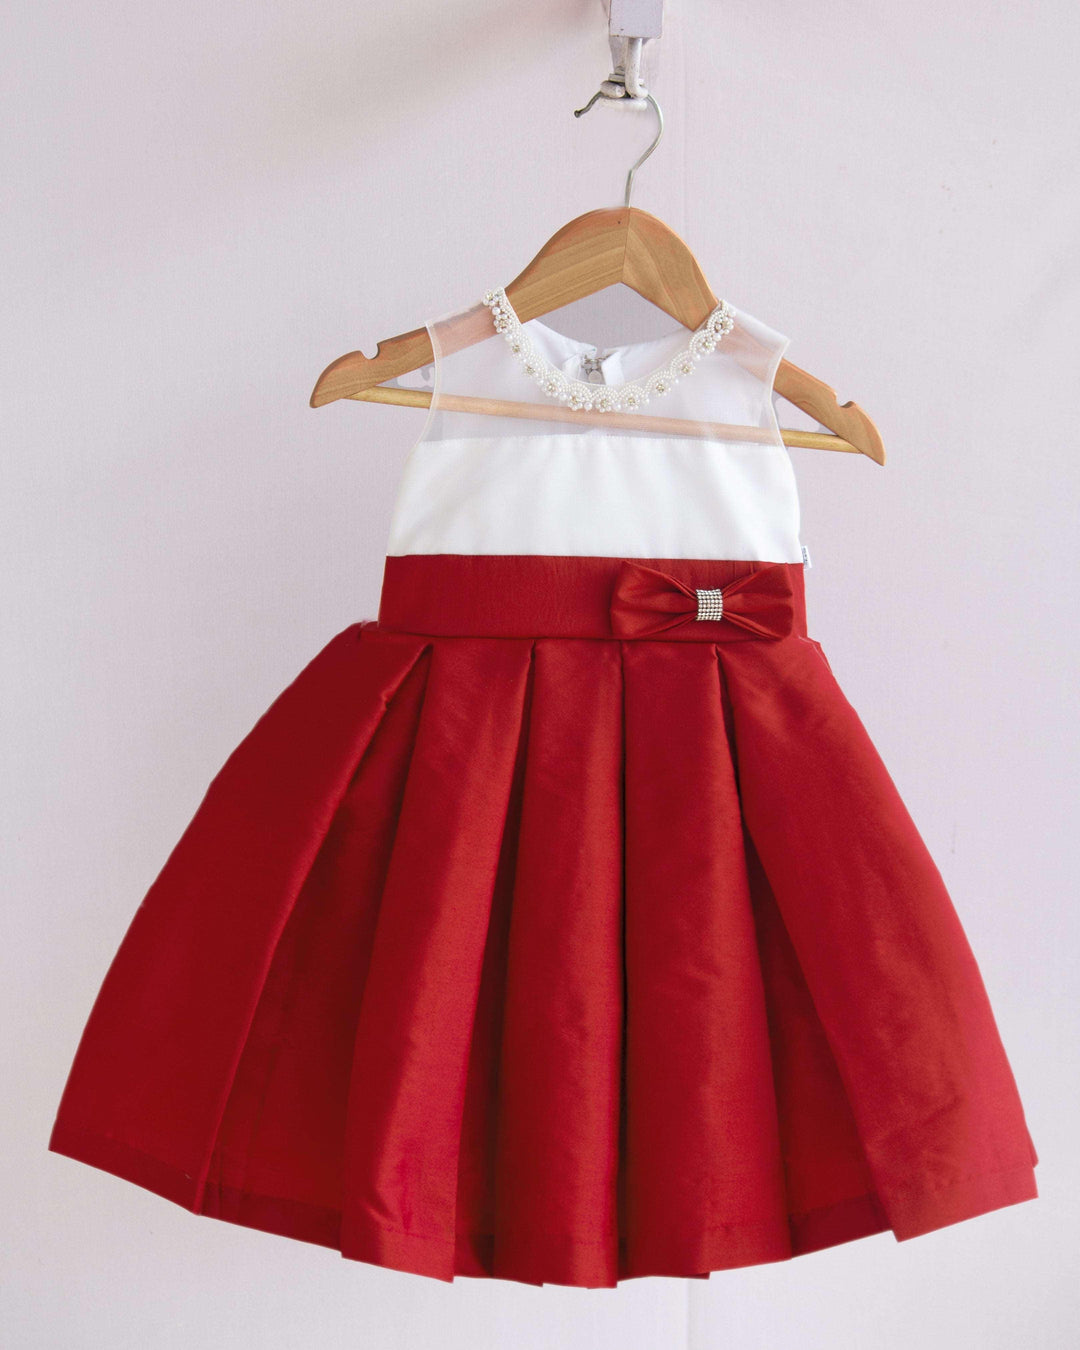 Red & White Combo Baby-Girls Box Pleated Tafetta Silk Handwork Frock
Material : Red shade party perfect box pleats frock is made with soft taffeta silk fabric. The yoke portion of the frock is designed in transparent neck design with